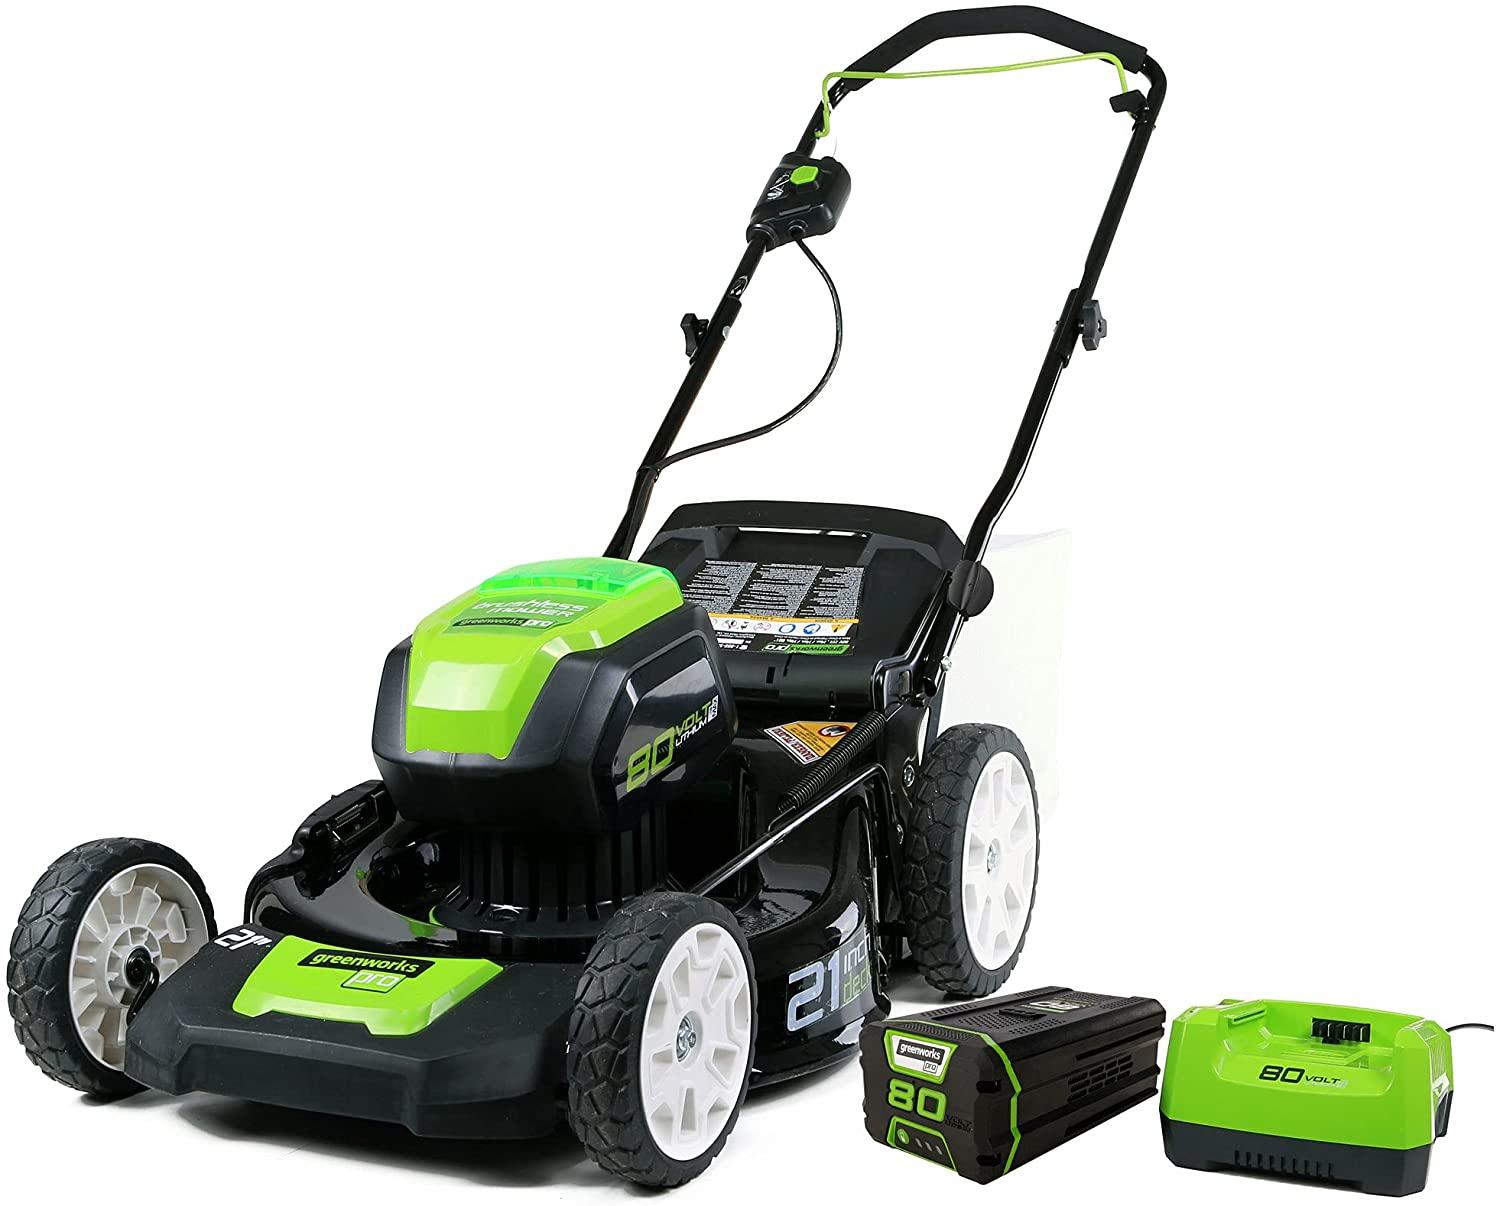 Greenworks Pro 80V 21 Inch Cordless Push Lawn Mower for $349.30 Shipped